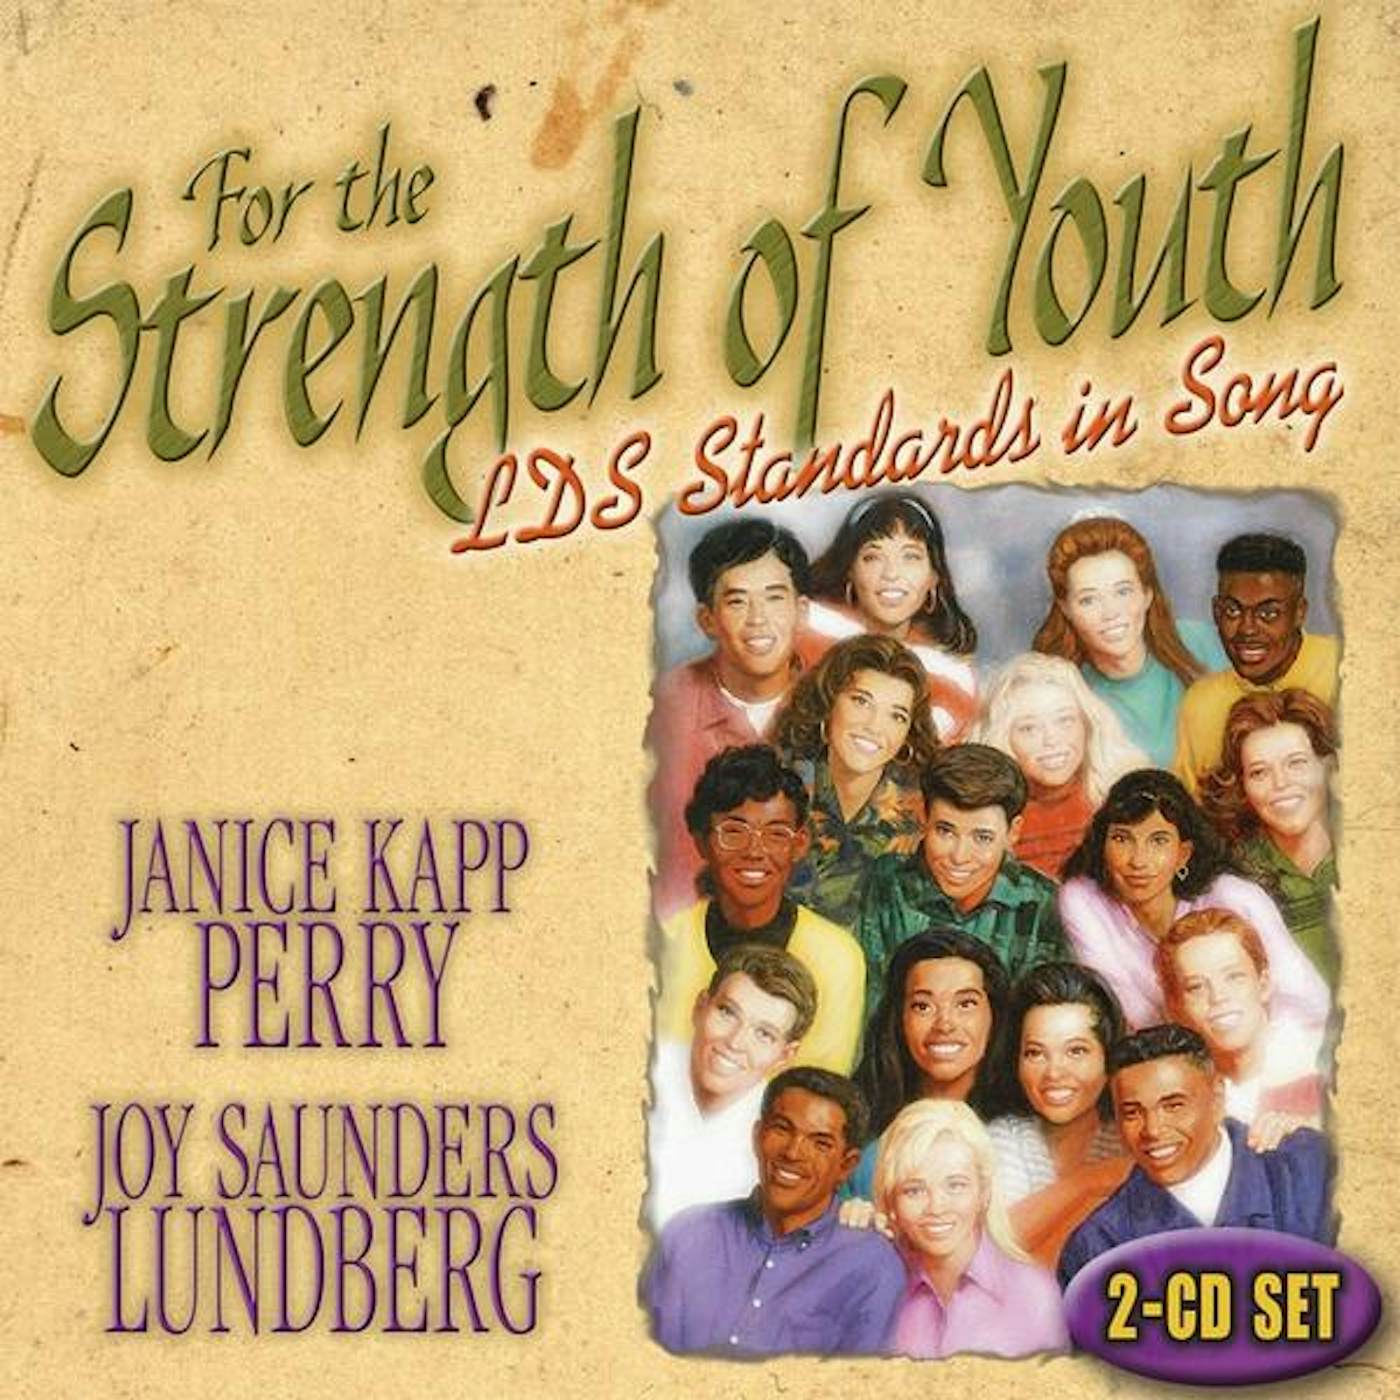 Janice Kapp Perry FOR THE STRENGTH OF YOUTH CD